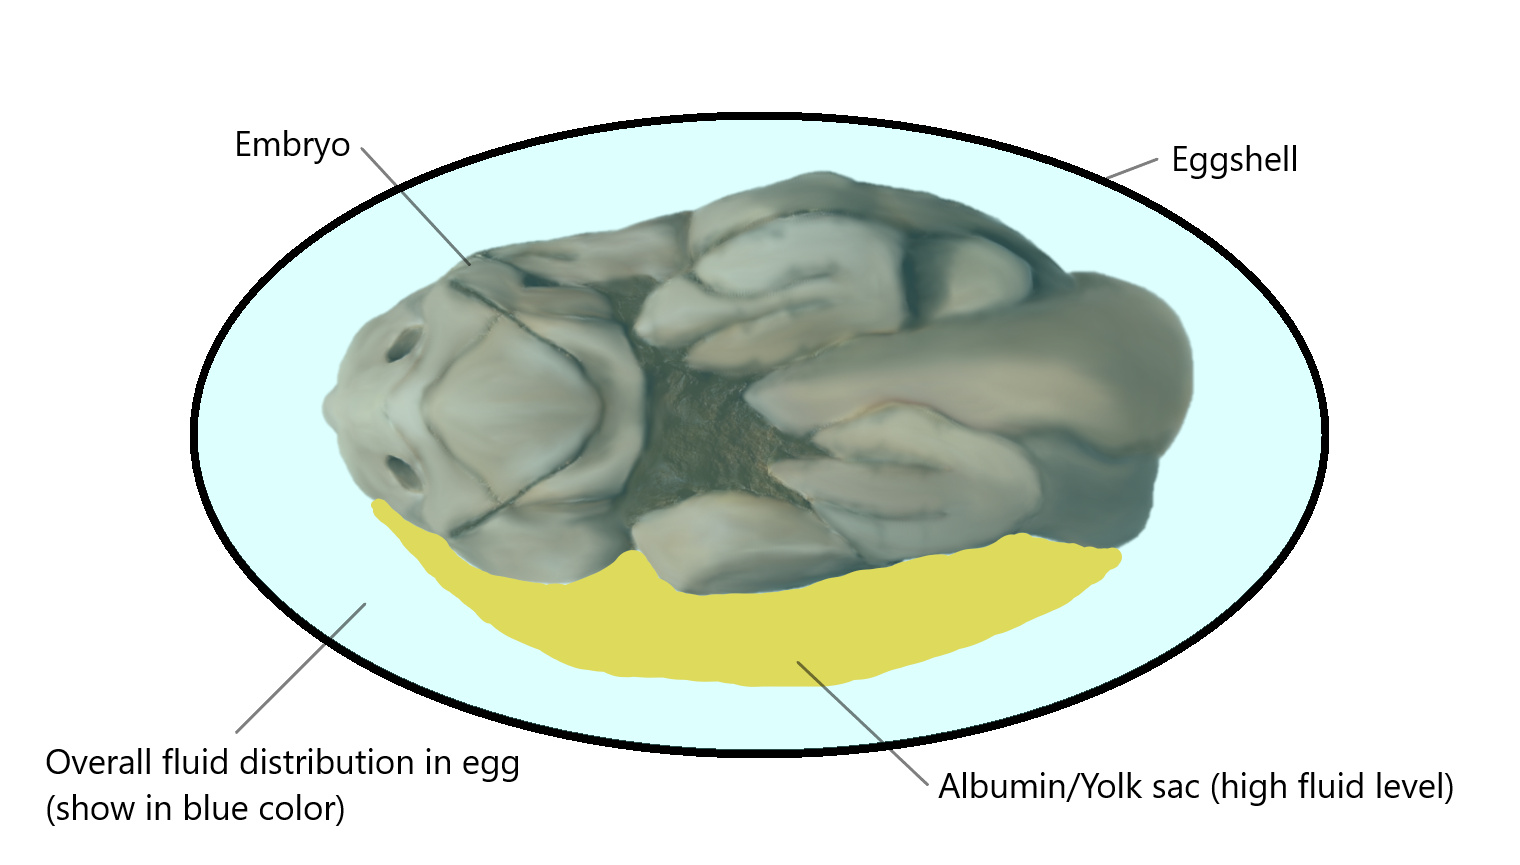 Figure 18. The general structure of dinosaur embryo within egg (in front view). The blue color shows the overall distribution of fluid within egg in initial stage before the embryo dies within the egg. 